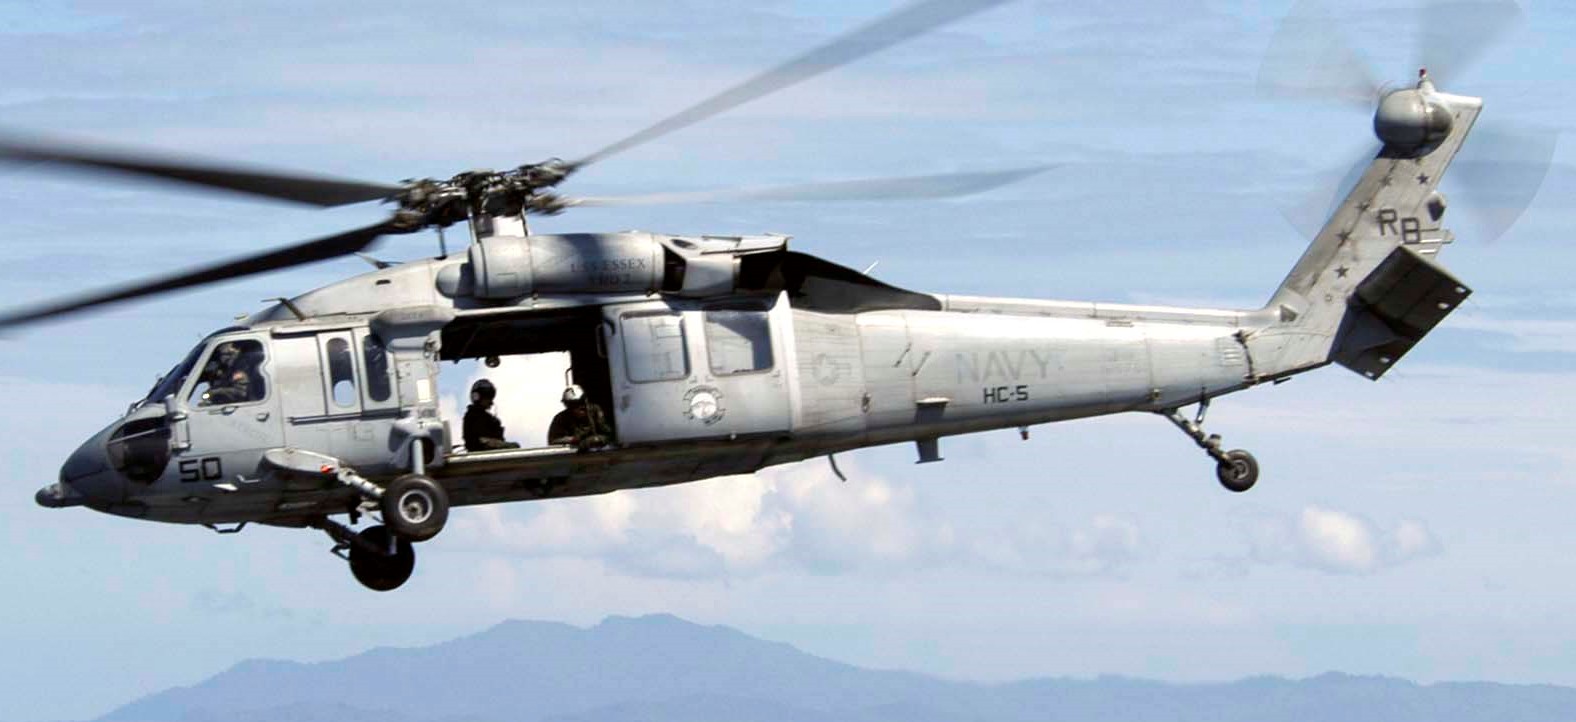 hc-5 providers helicopter combat support squadron navy mh-60s seahawk 15